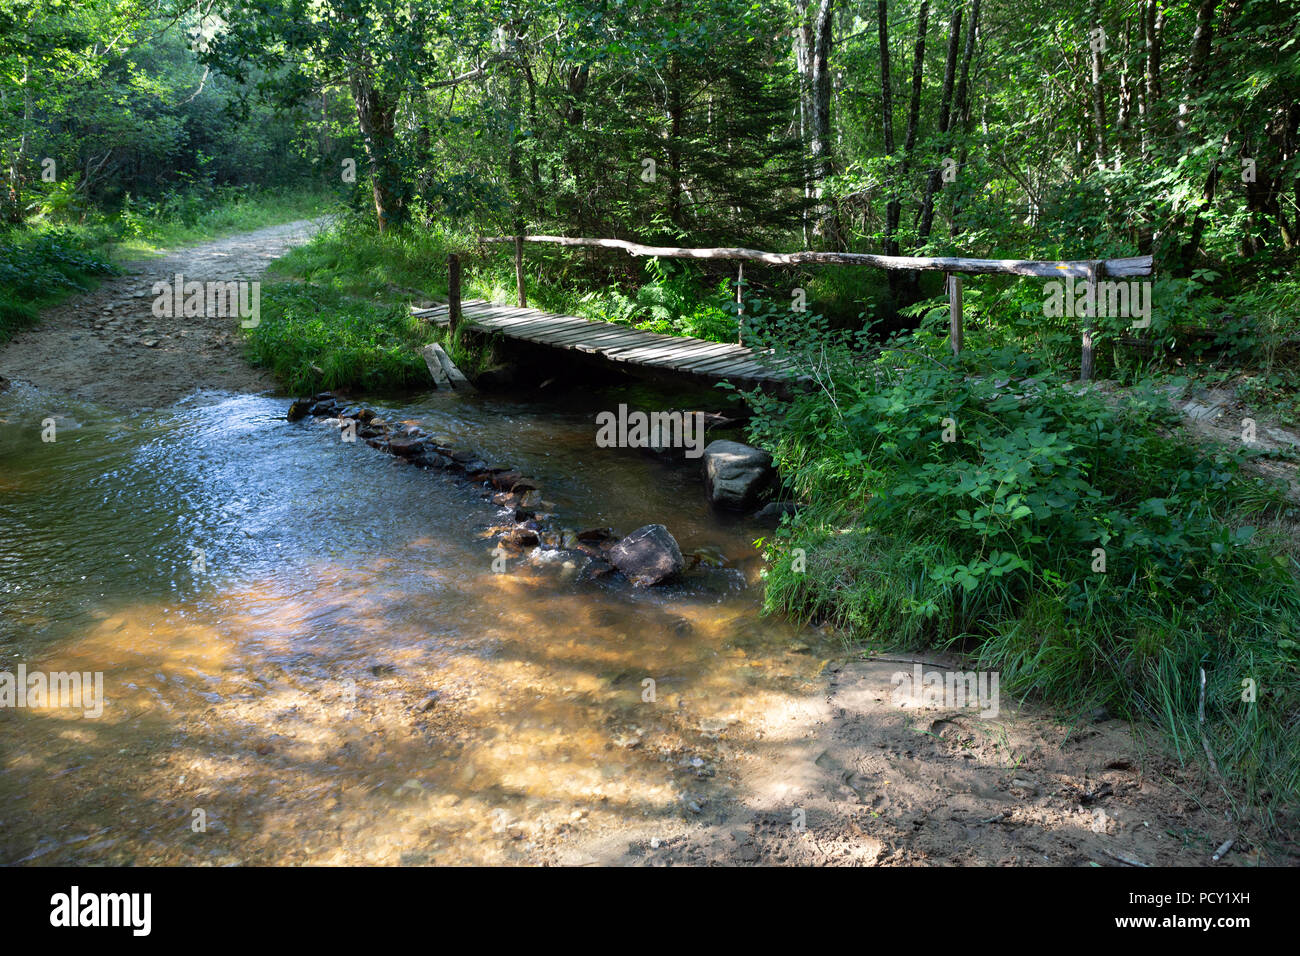 Peaceful Scene Of An Idyllic Wooden Bridge Over A Little River In The Natural Forest Area Of Limousin In France Stock Photo Alamy